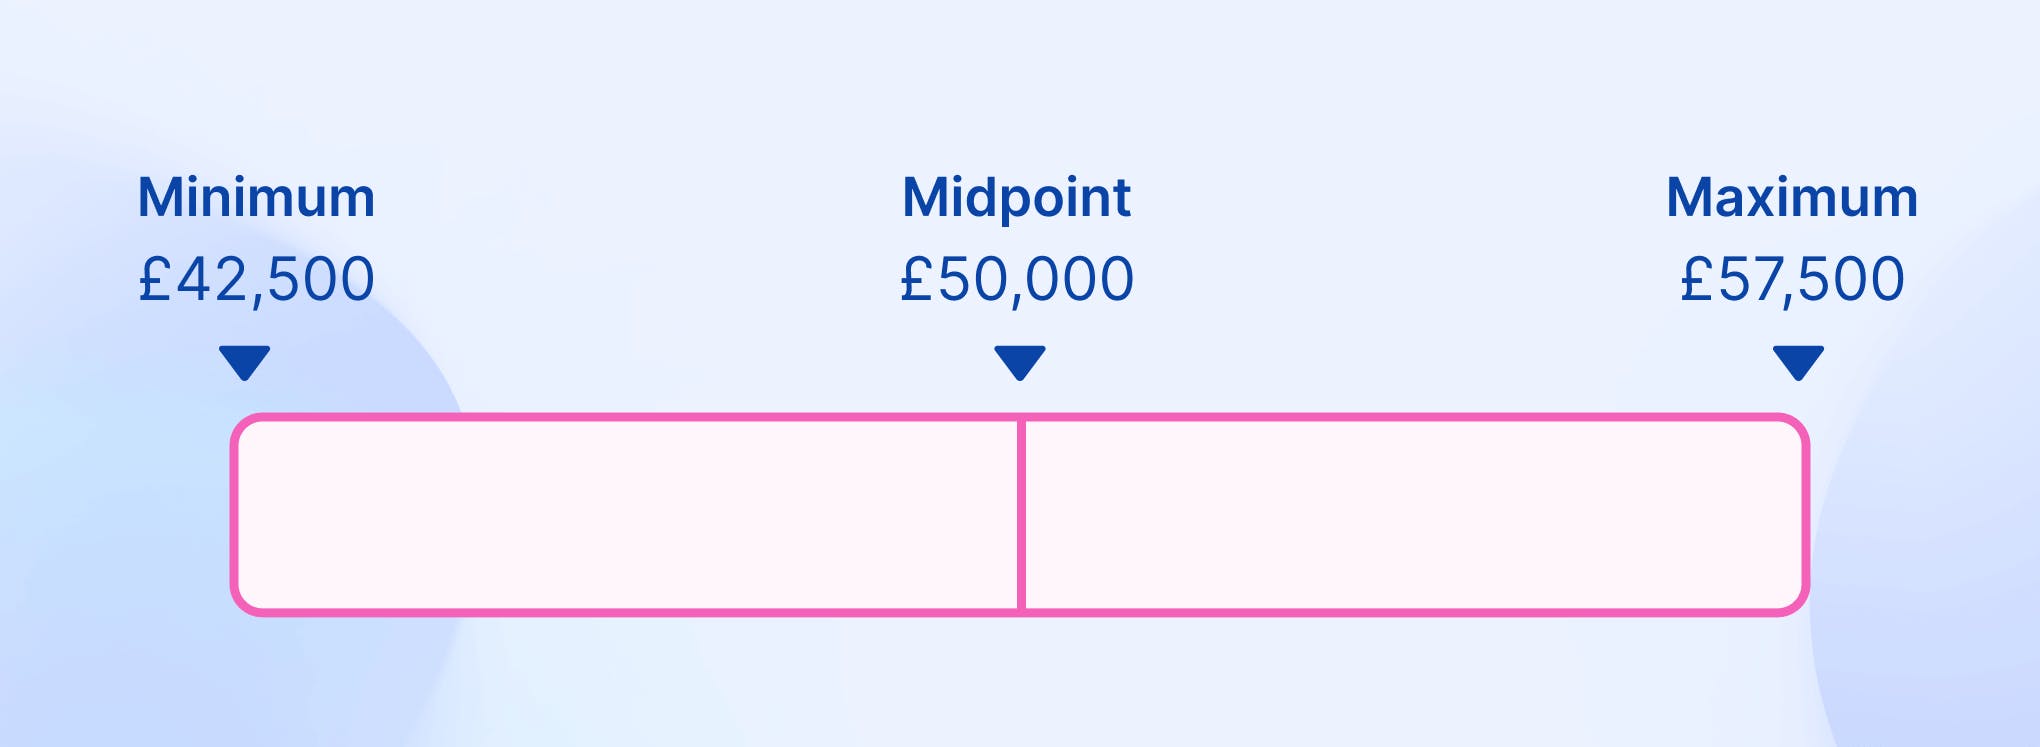 Example salary band showing midpoint and range.